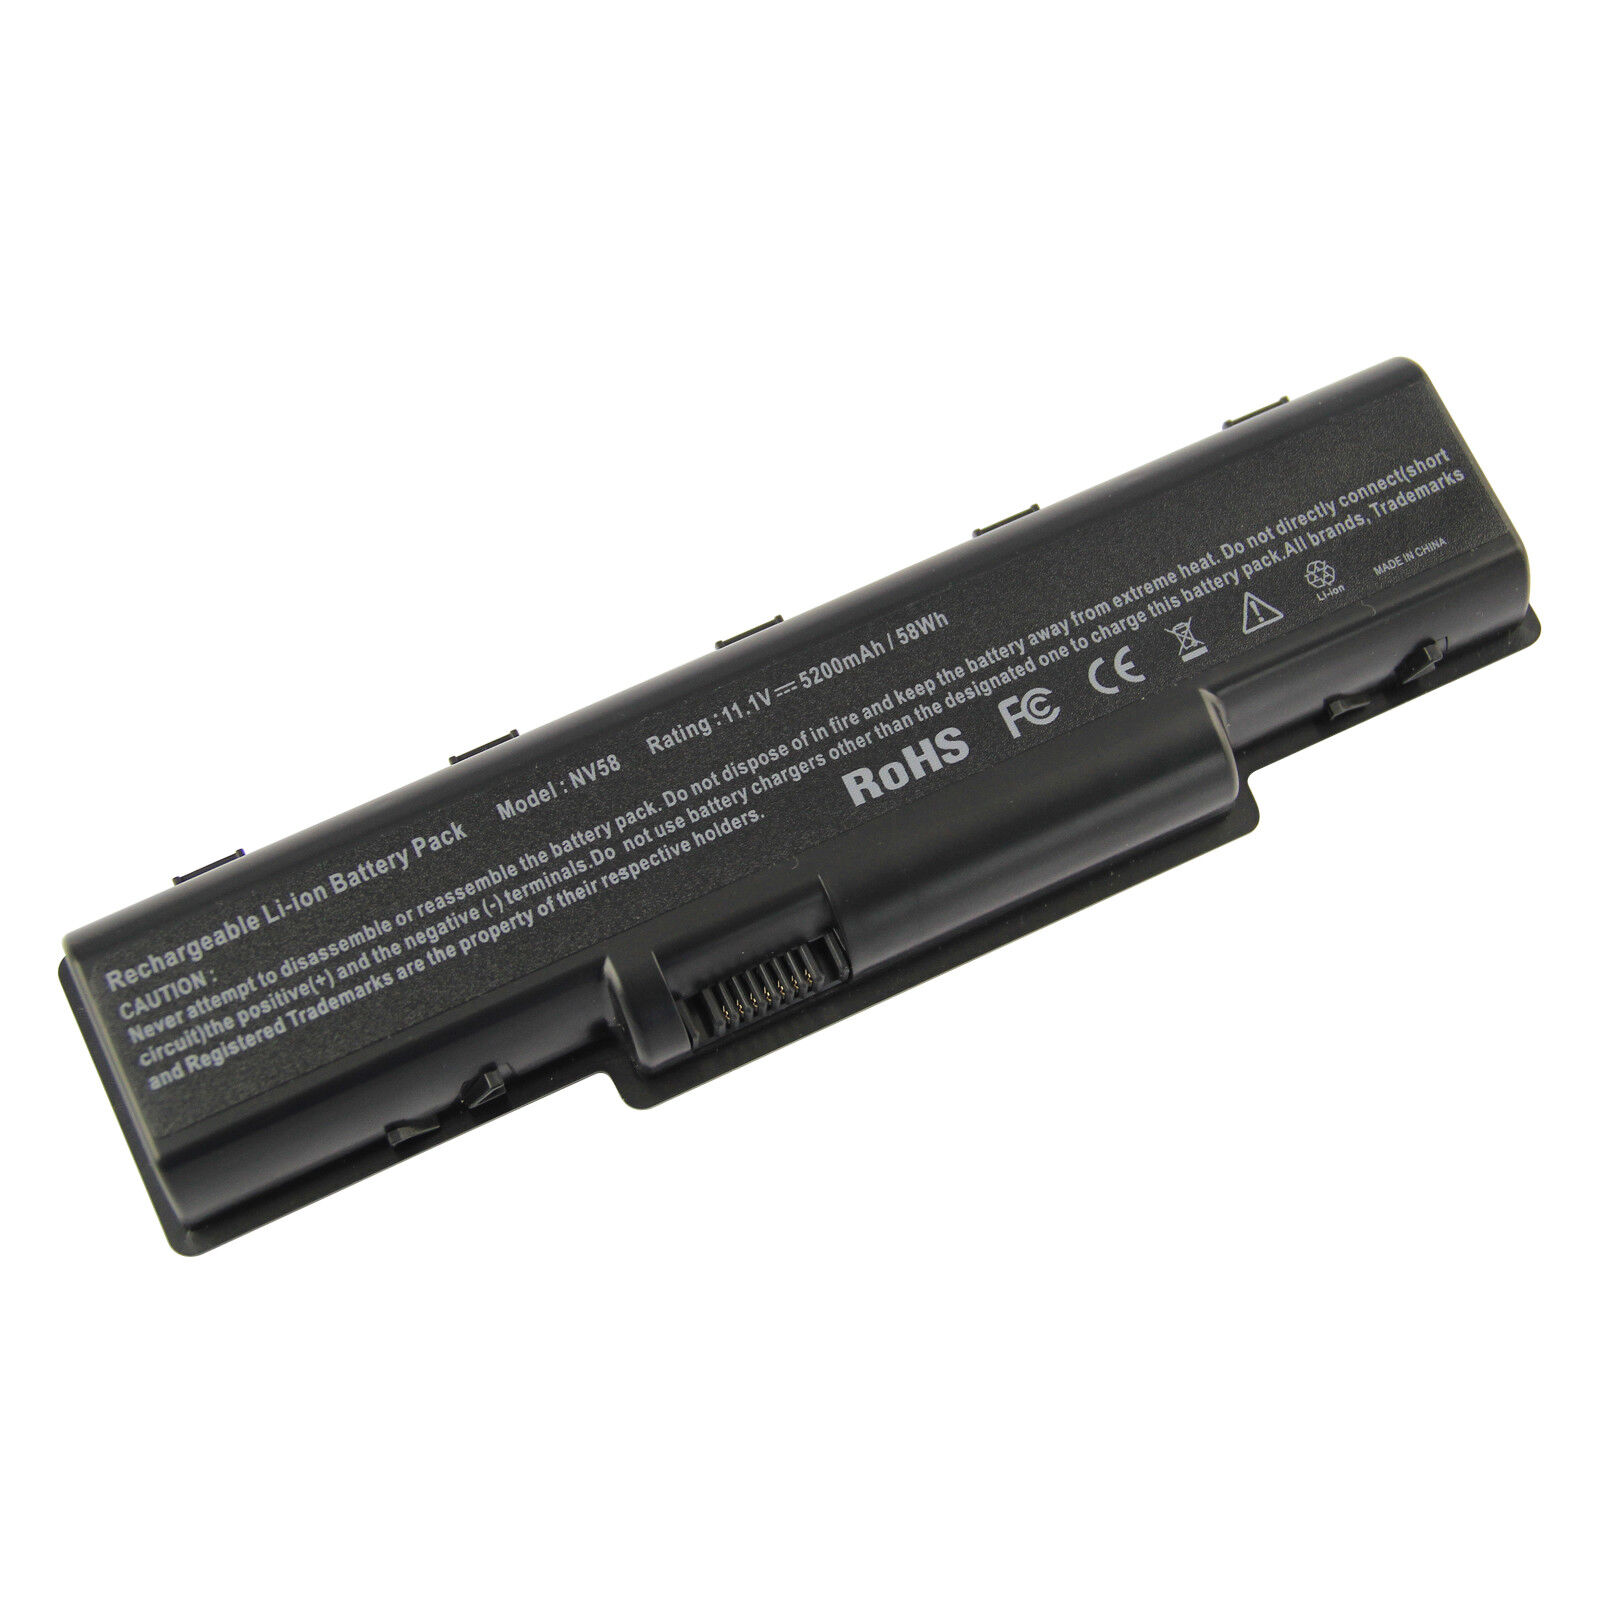 New battery for Acer Aspire 5517 5532 AS09A31 AS09A41 Gateway NV58 NV52 5200mAh 